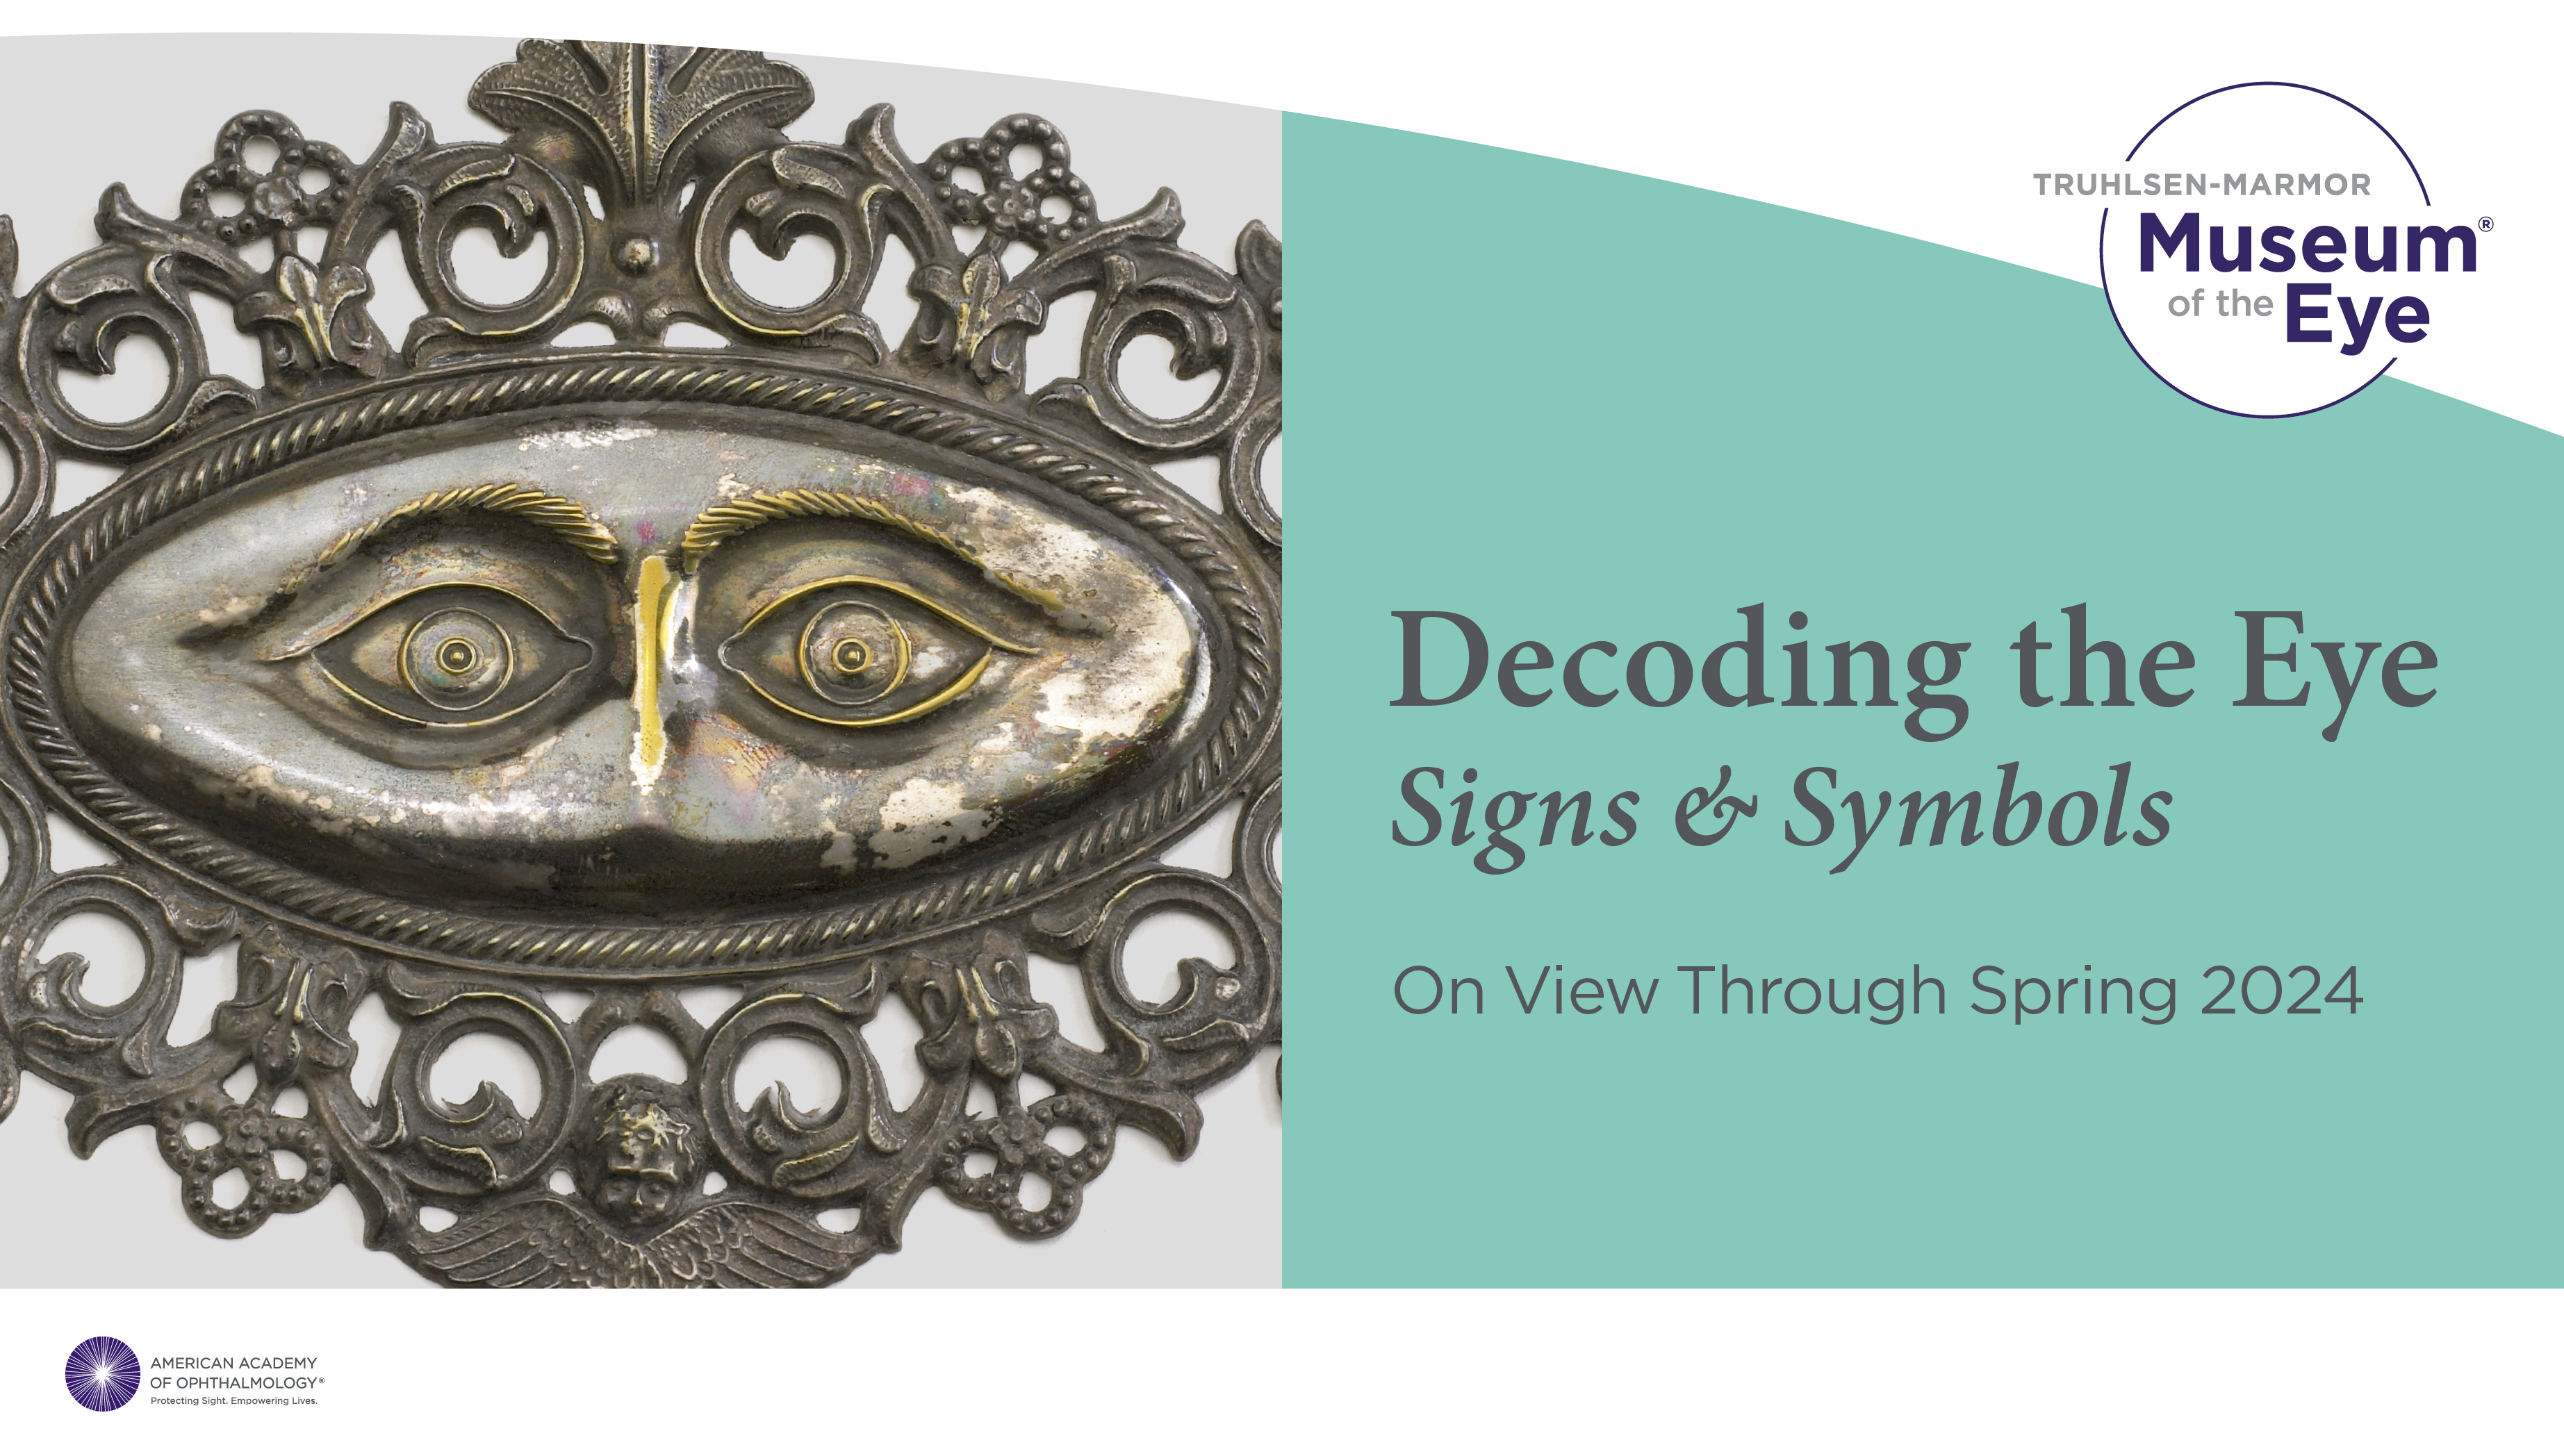 A photograph of a silver metal placard with the image of a pair of eyes on it splits the image with a teal block with gray text in it. The text reads: Decoding the Eye: Signs & Symbols On View Through Spring 2024. There is a small circle logo in the upper right hand corner that reads: Truhlsen-Marmor Museum of the Eye. 